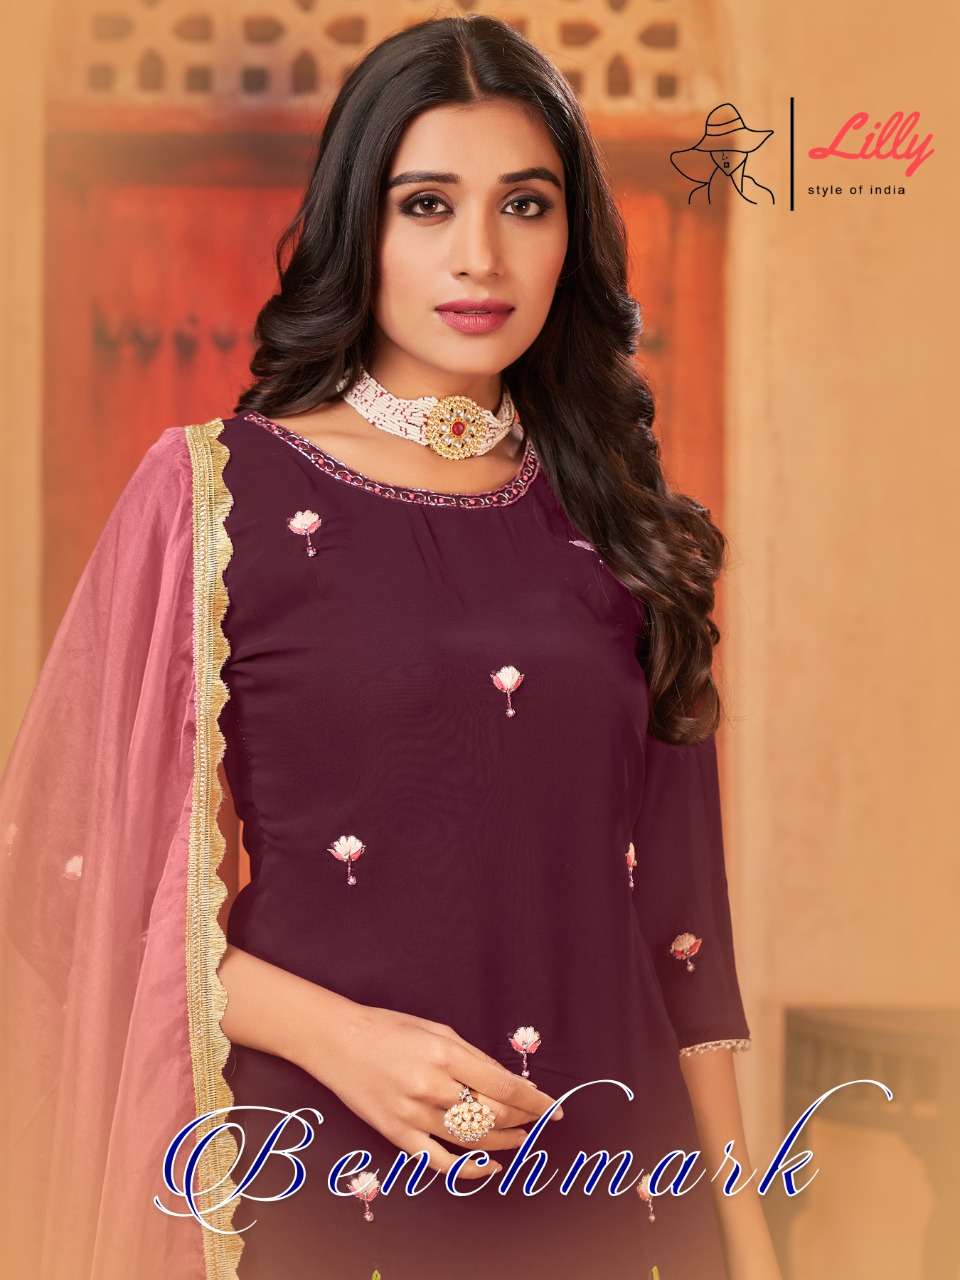 BENCHMARK BY LILLY STYLE OF INDIA NEW DESIGNER HEAVY KURTI SHARARA WITH DUPATTA COLLECTION WHOLESALER